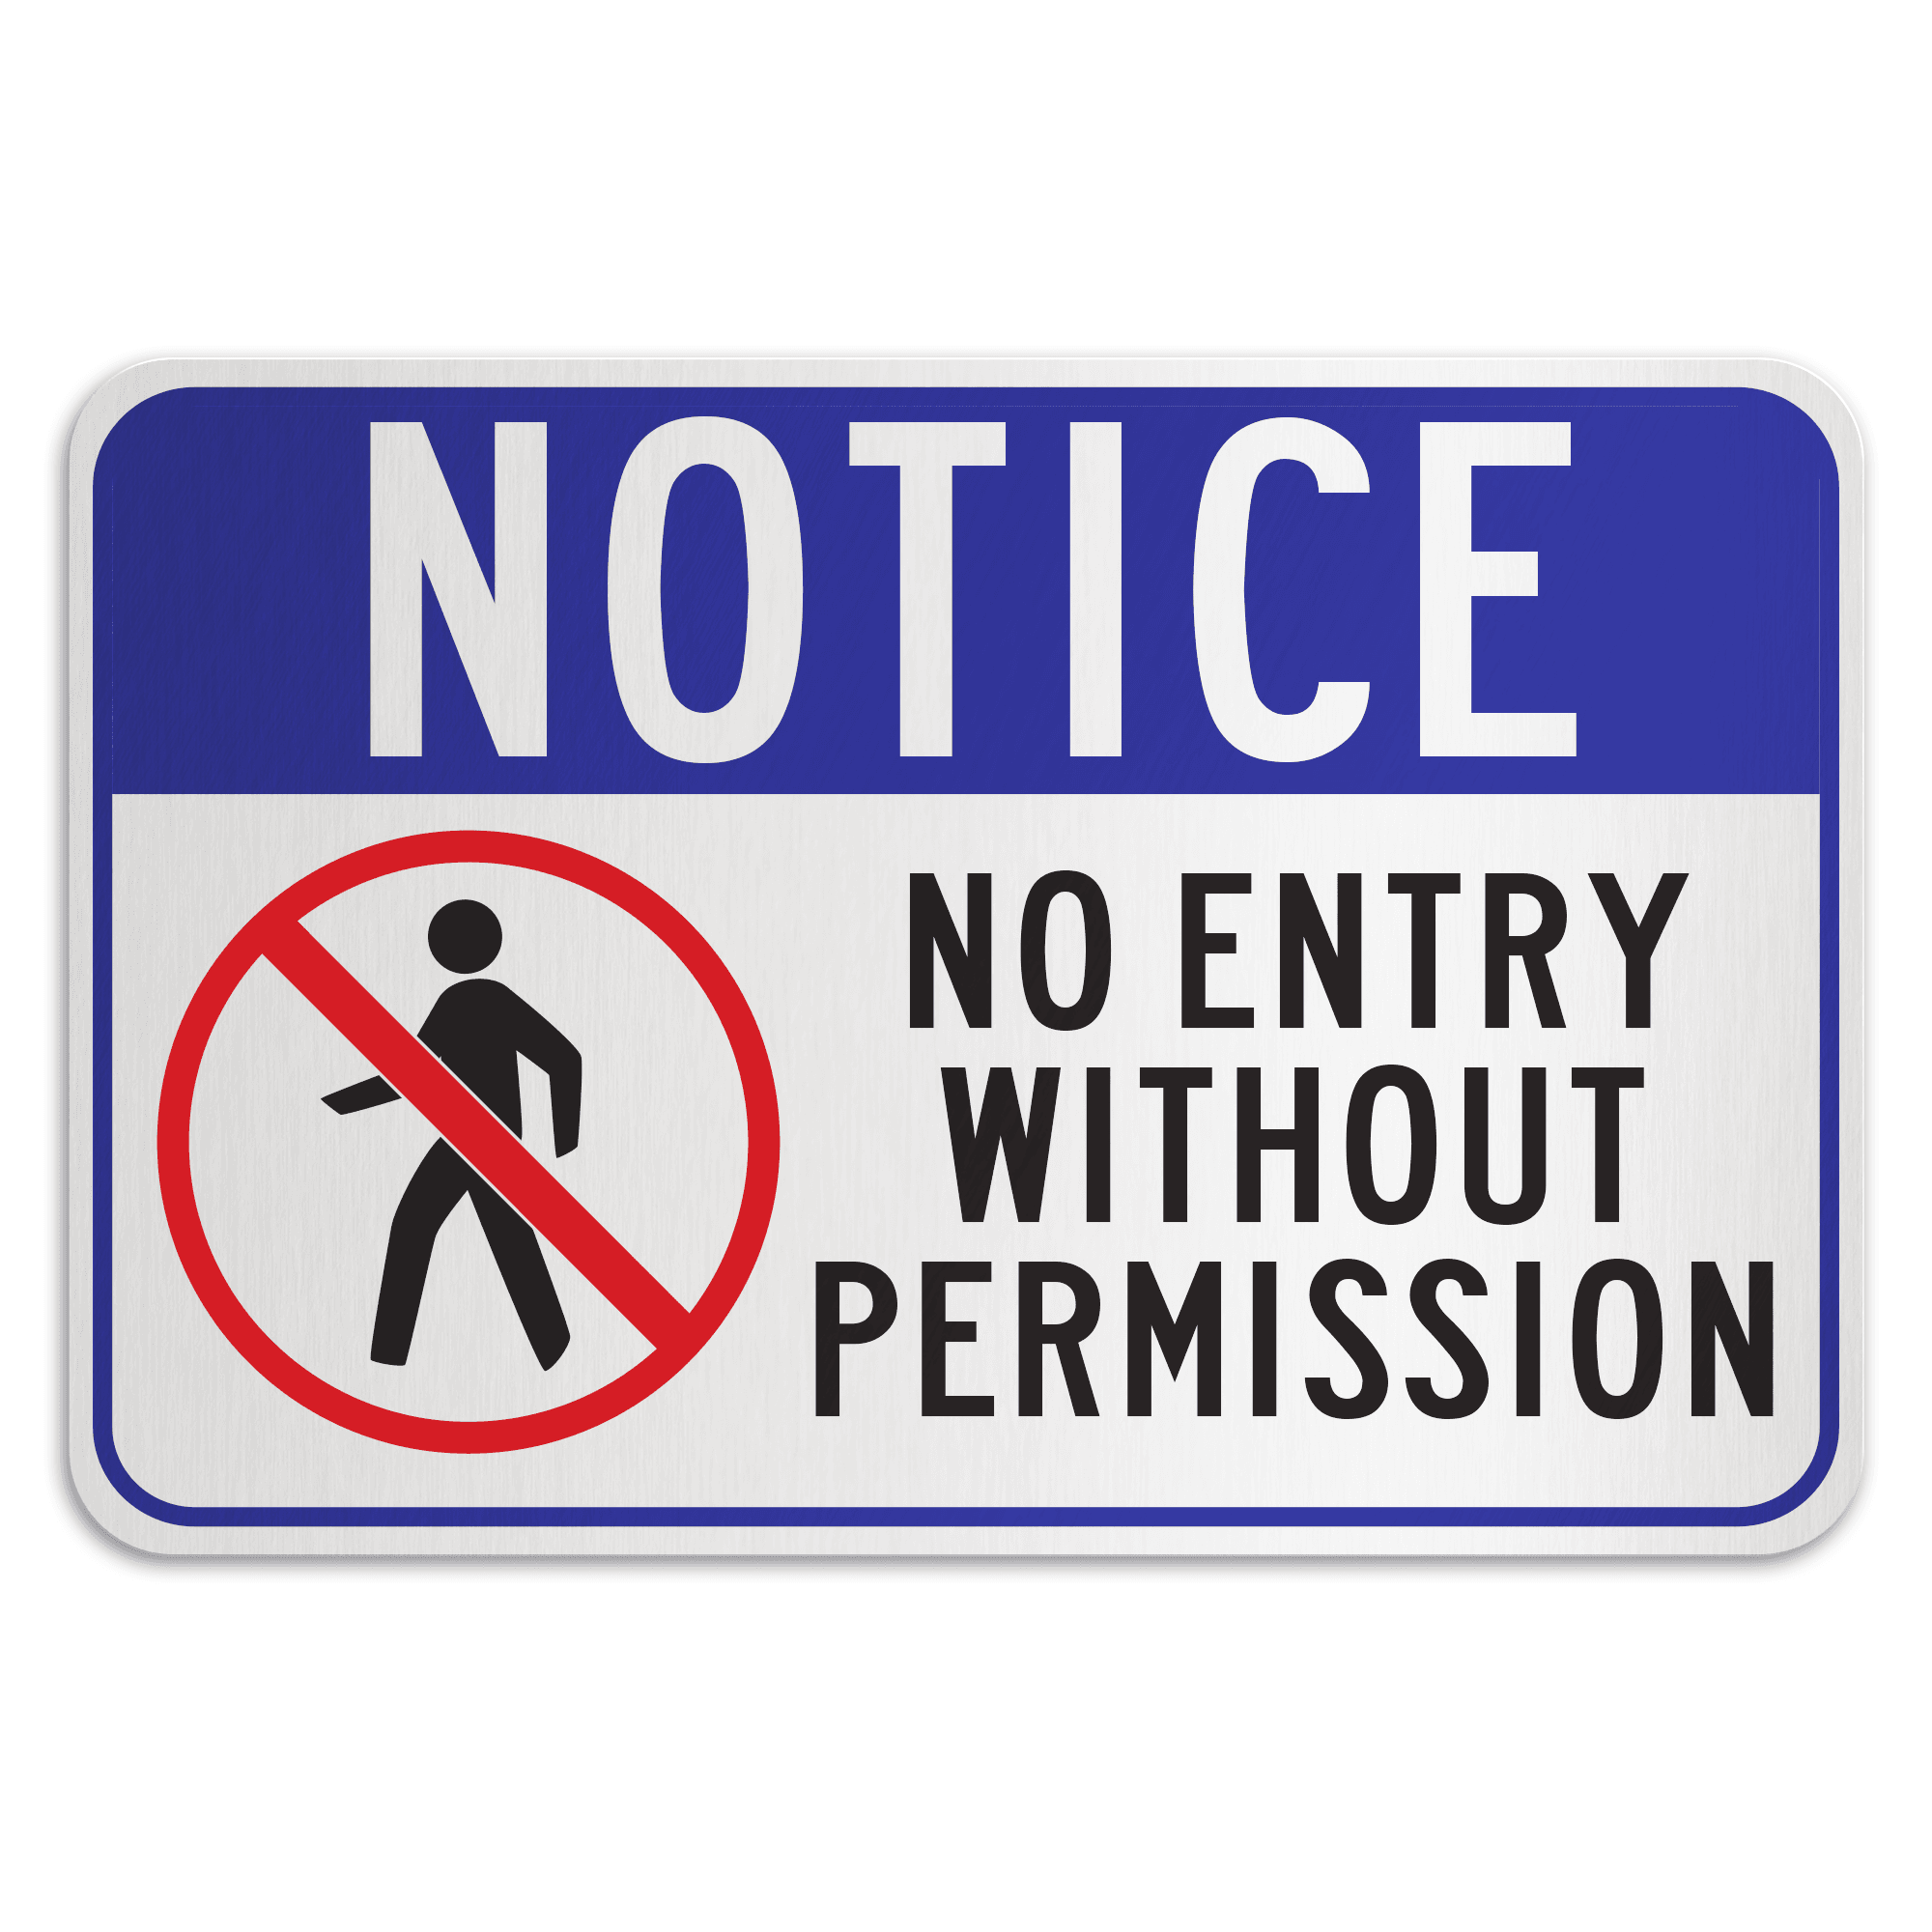 NOTICE NO ENTRY WITHOUT PERMISSION American Sign Company